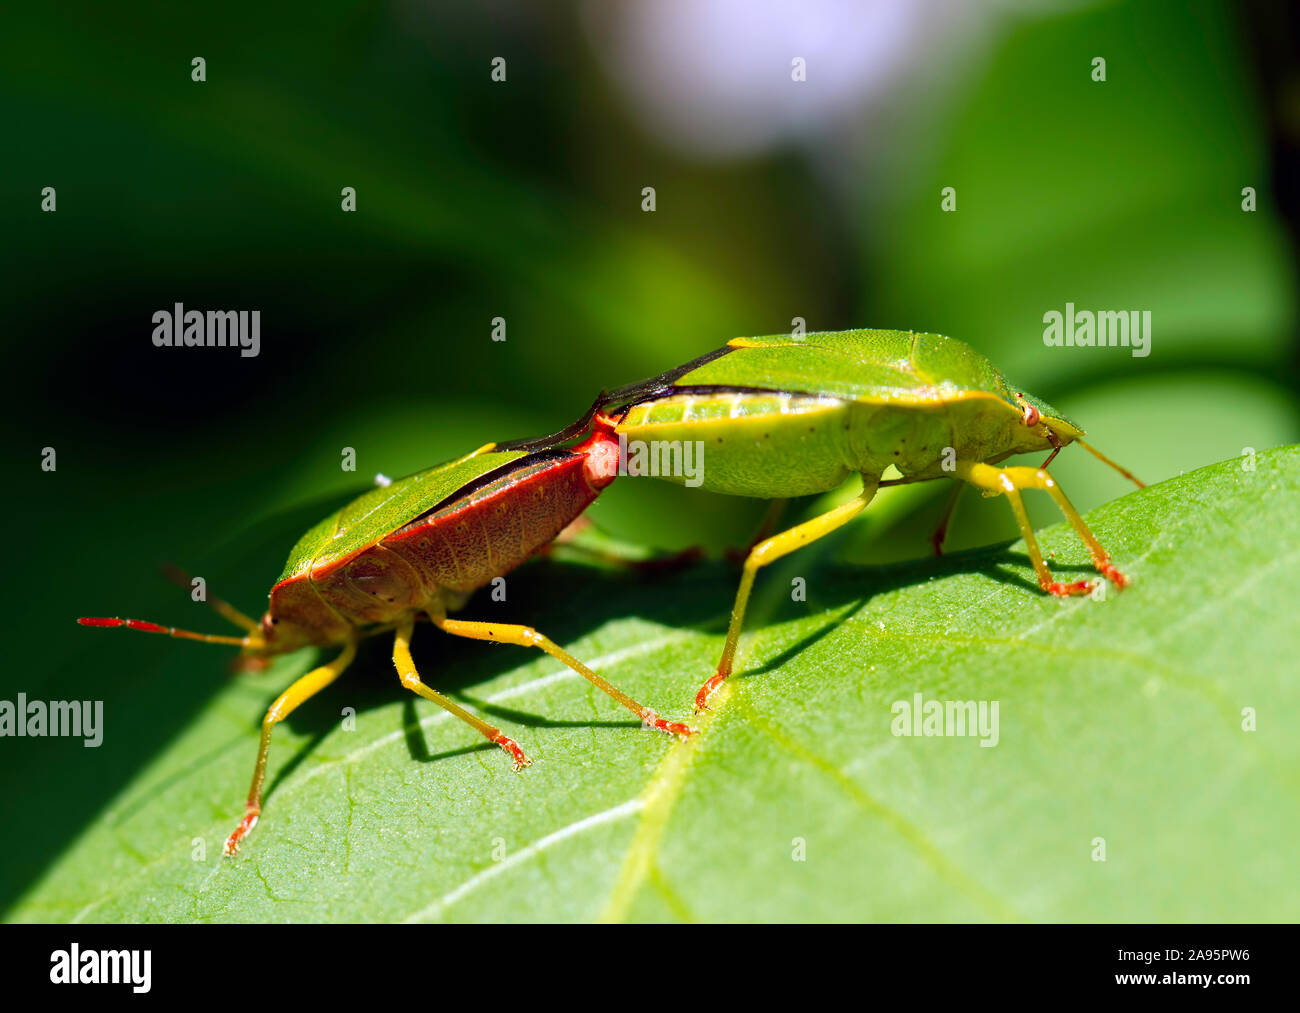 Heteroptera Green Stinky Bugs Mating on a Leaf in the Spring Stock Photo